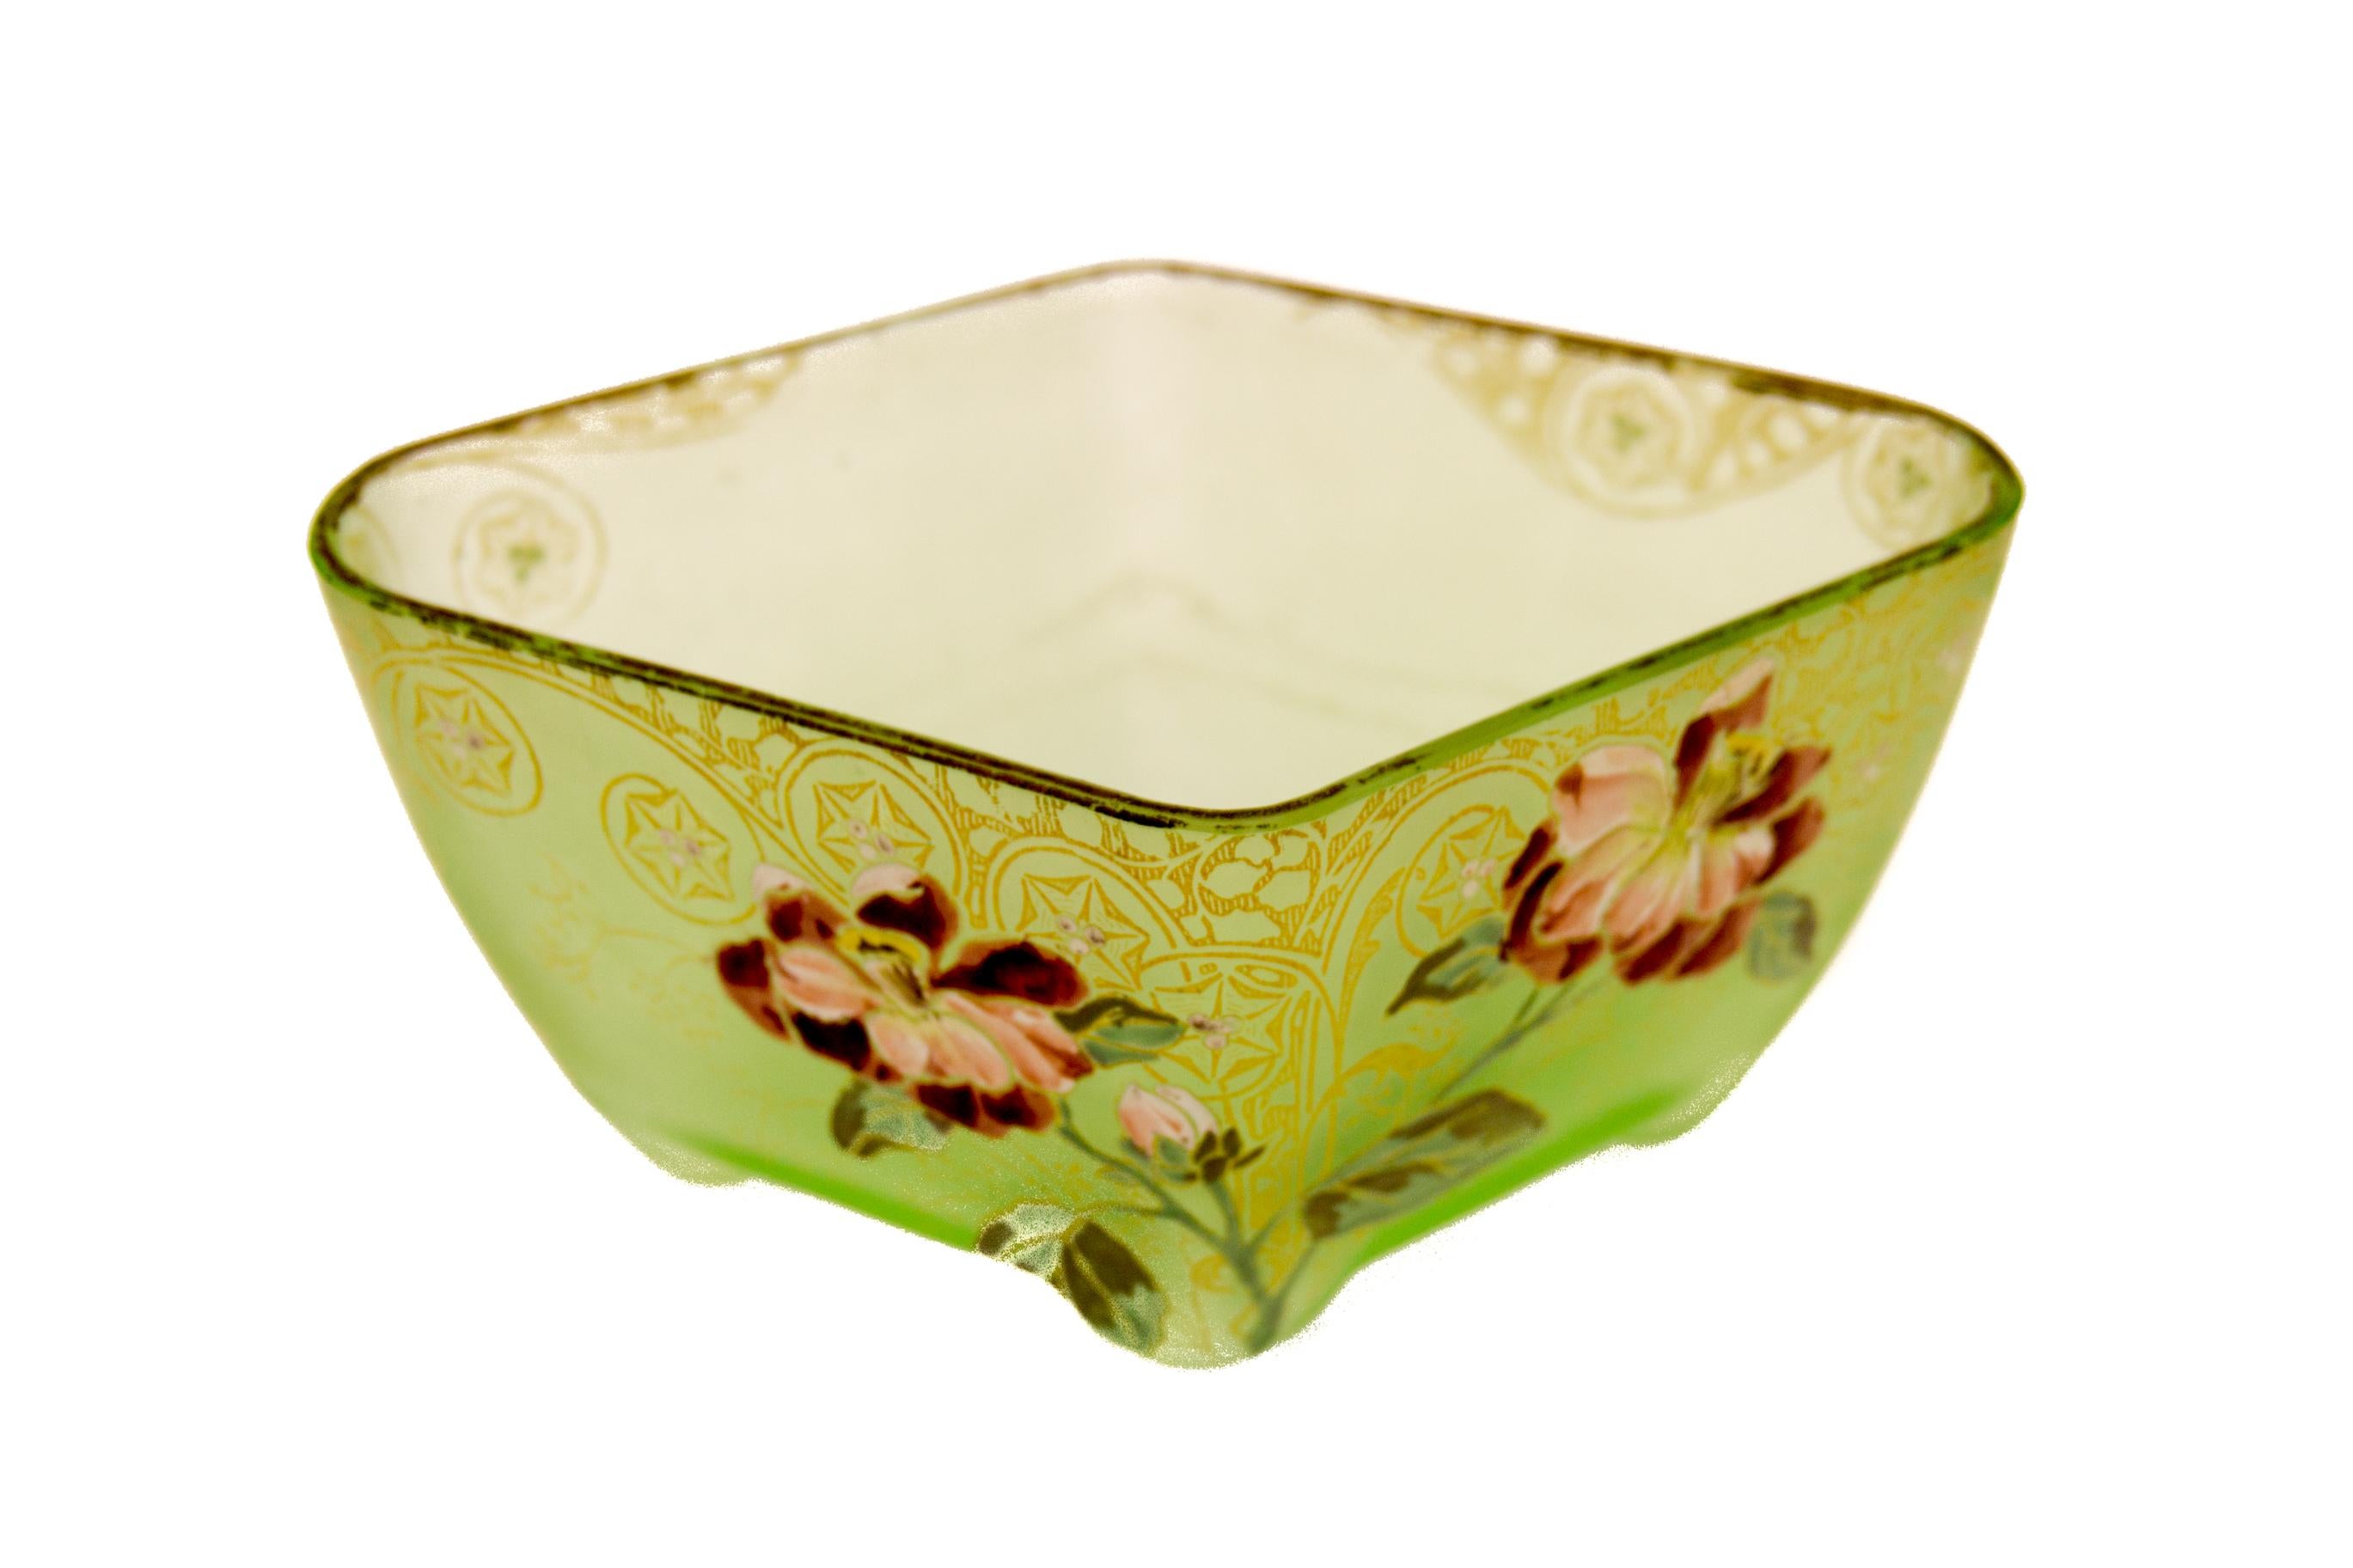 French Art Nouveau frosted green glass bowl or jardinière with an enameled hand painted floral decoration and gold highlight pattern, circa 1920.
In a good condition, slight loss to gold pattern on top.
Dimensions: height 11 cm / 4.3 in; width 18